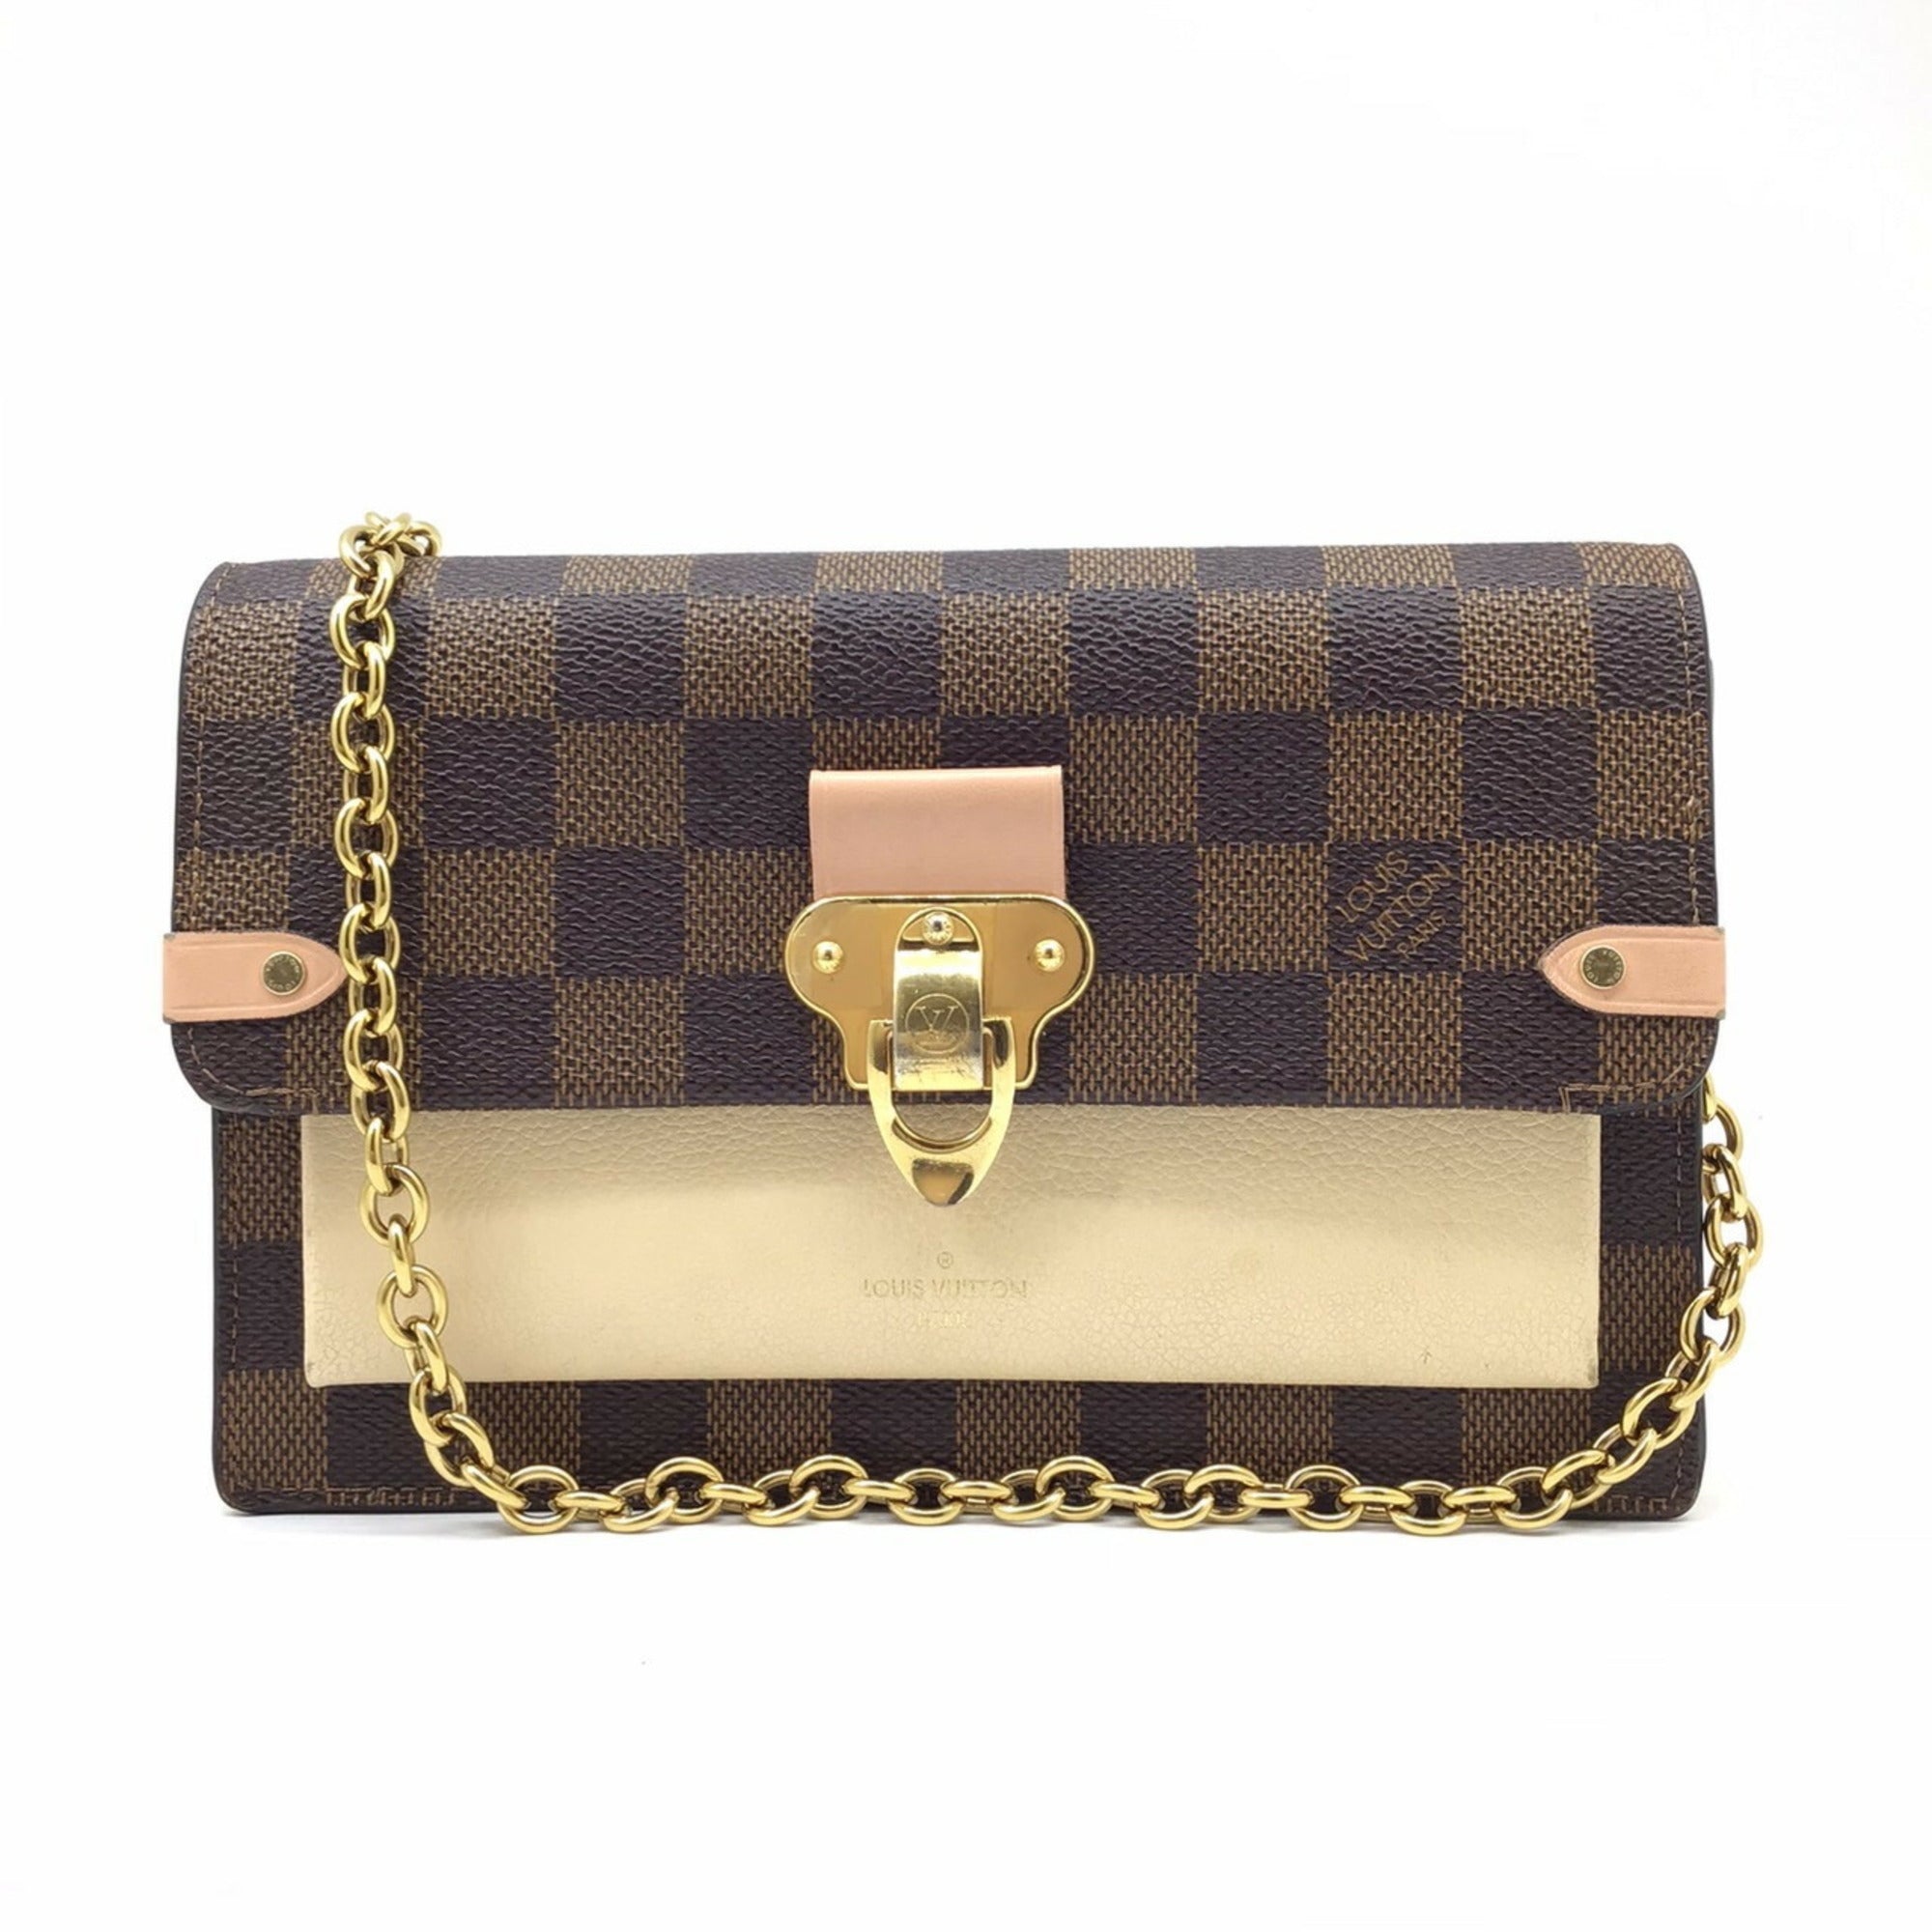 LOUIS VUITTON Louis Vuitton love note shoulder bag M54501 leather red pink  chain gold hardware